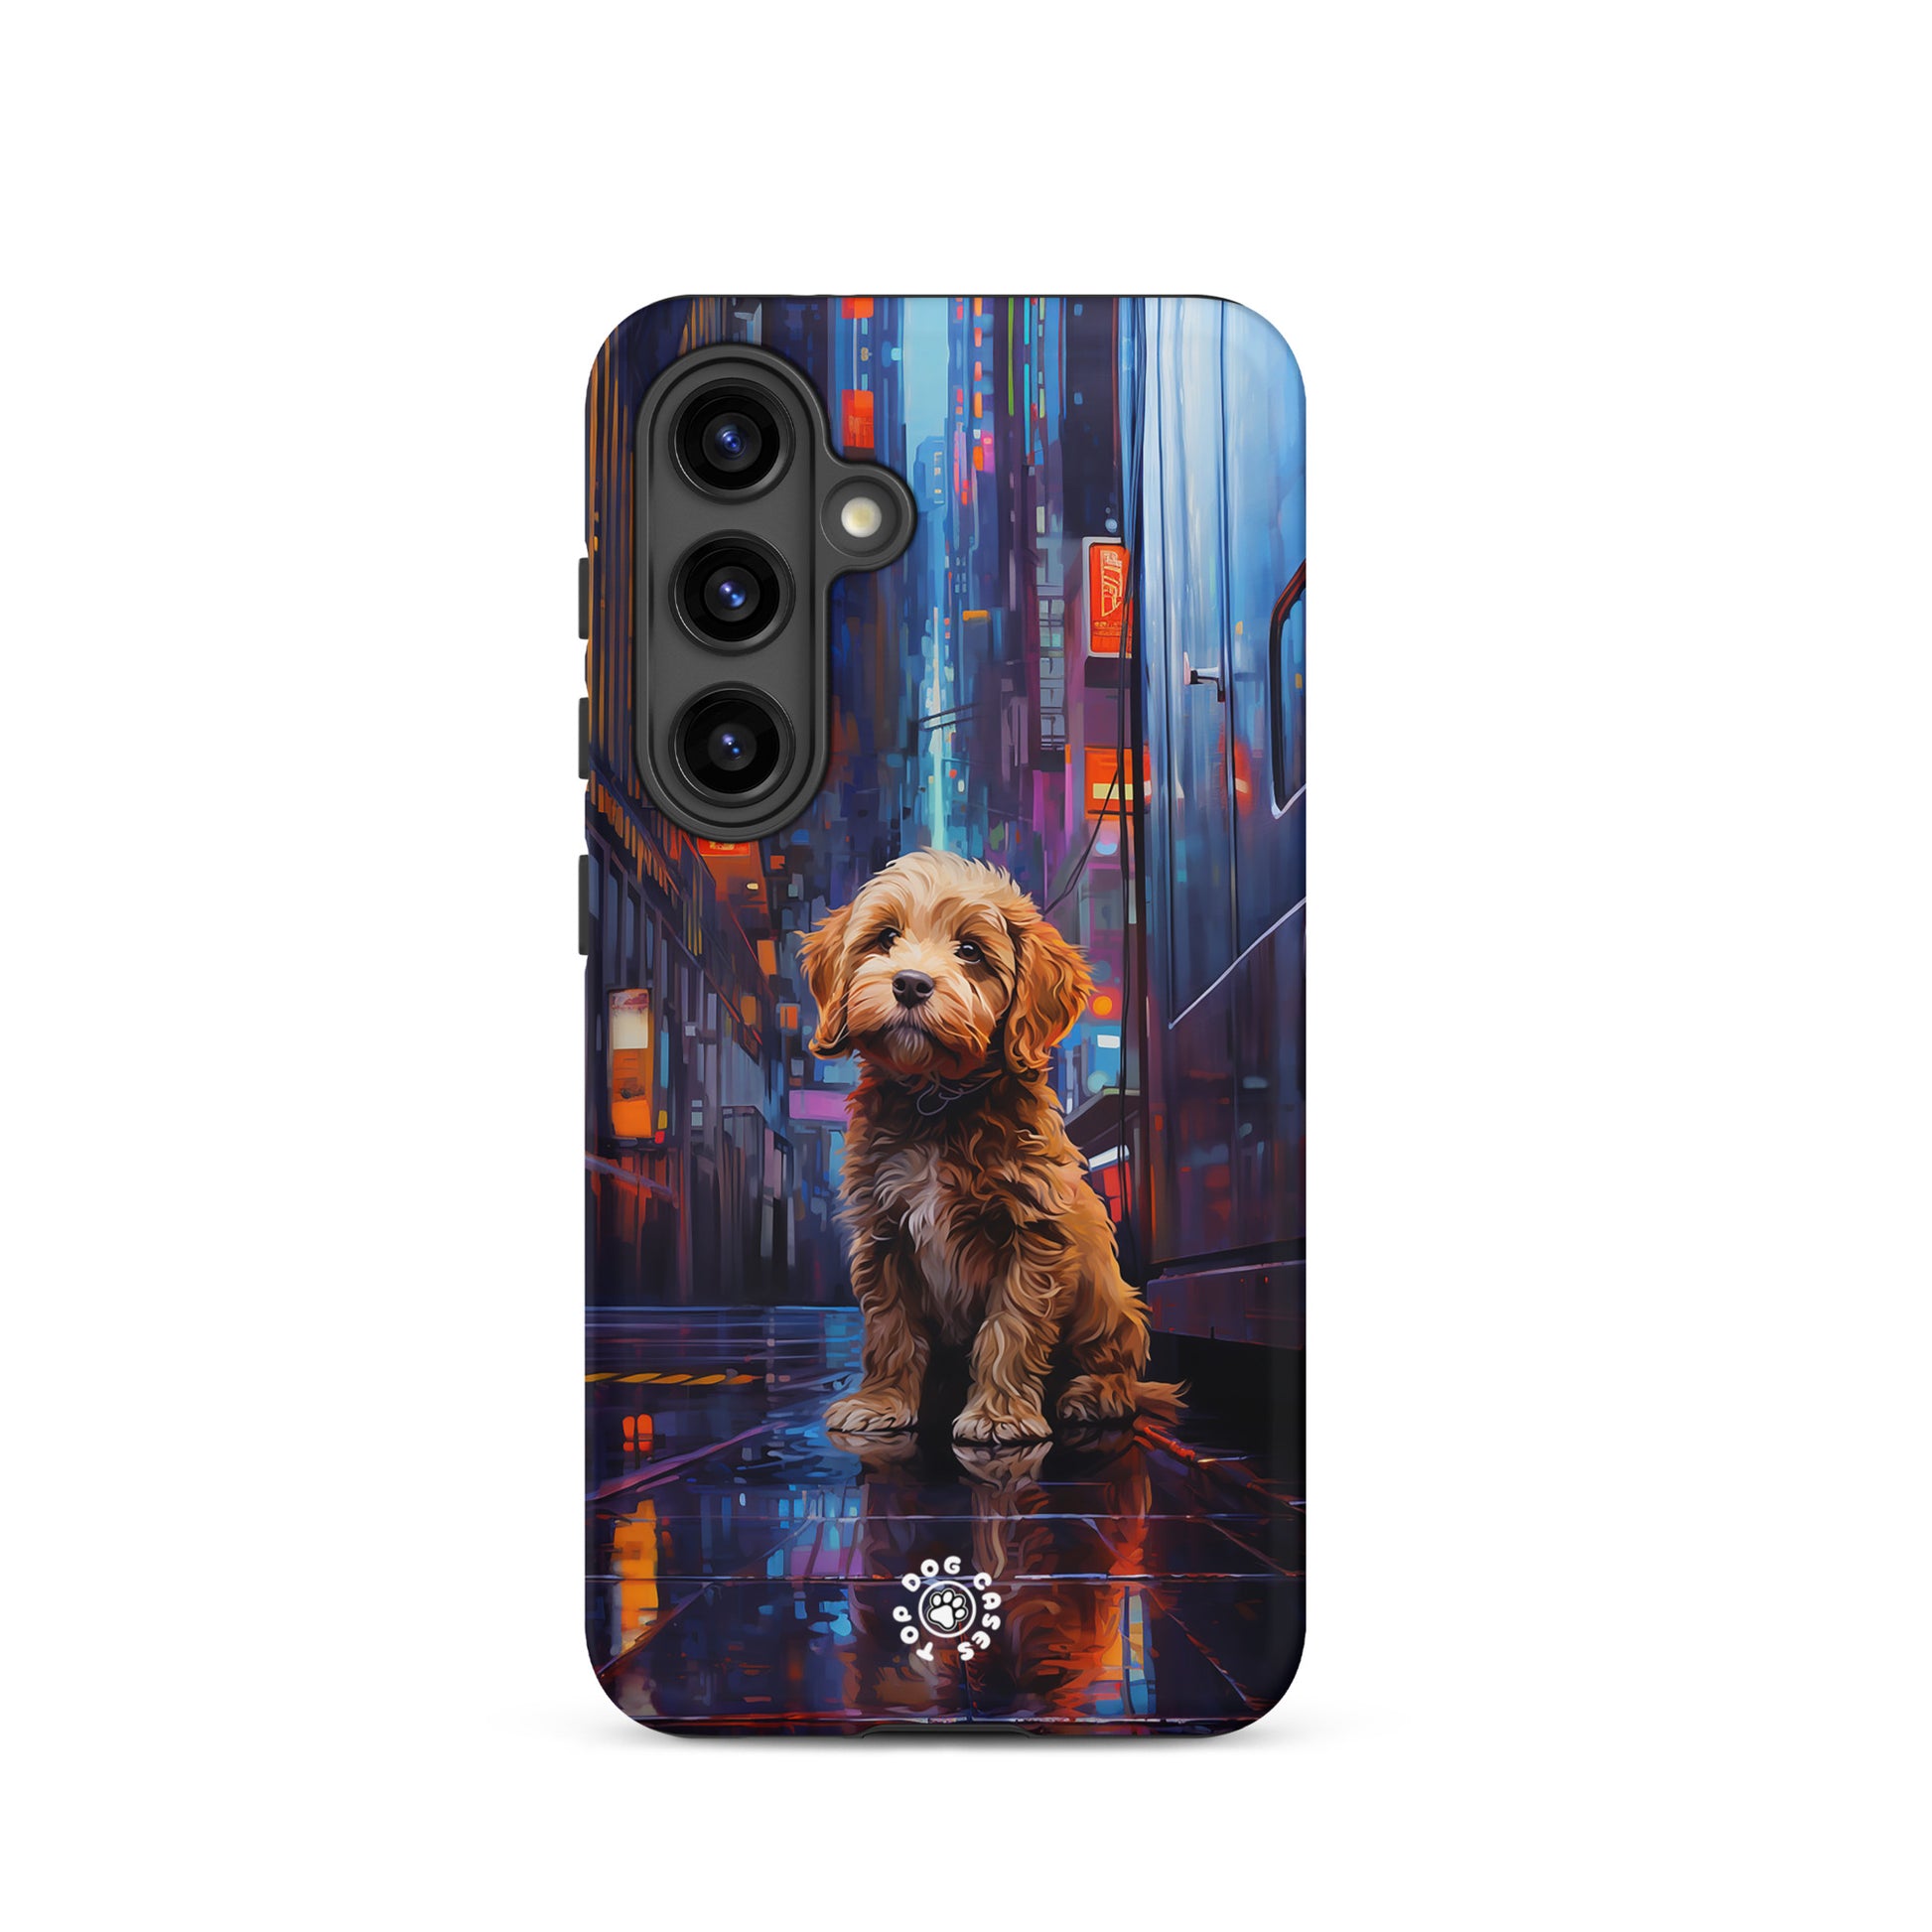 Goldendoodle in the City - Samsung Phone Case - Cute Phone Cases - Top Dog Cases - #CityDogs, #CuteDogs, #CyberpunkCityDog, #Goldendoodle, #SamsungGalaxyCase, #SamsungGalaxyS20, #SamsungGalaxyS21, #SamsungGalaxyS22, #SamsungGalaxyS22Ultra, #SamsungGalaxyS23, #SamsungGalaxyS23Ultra